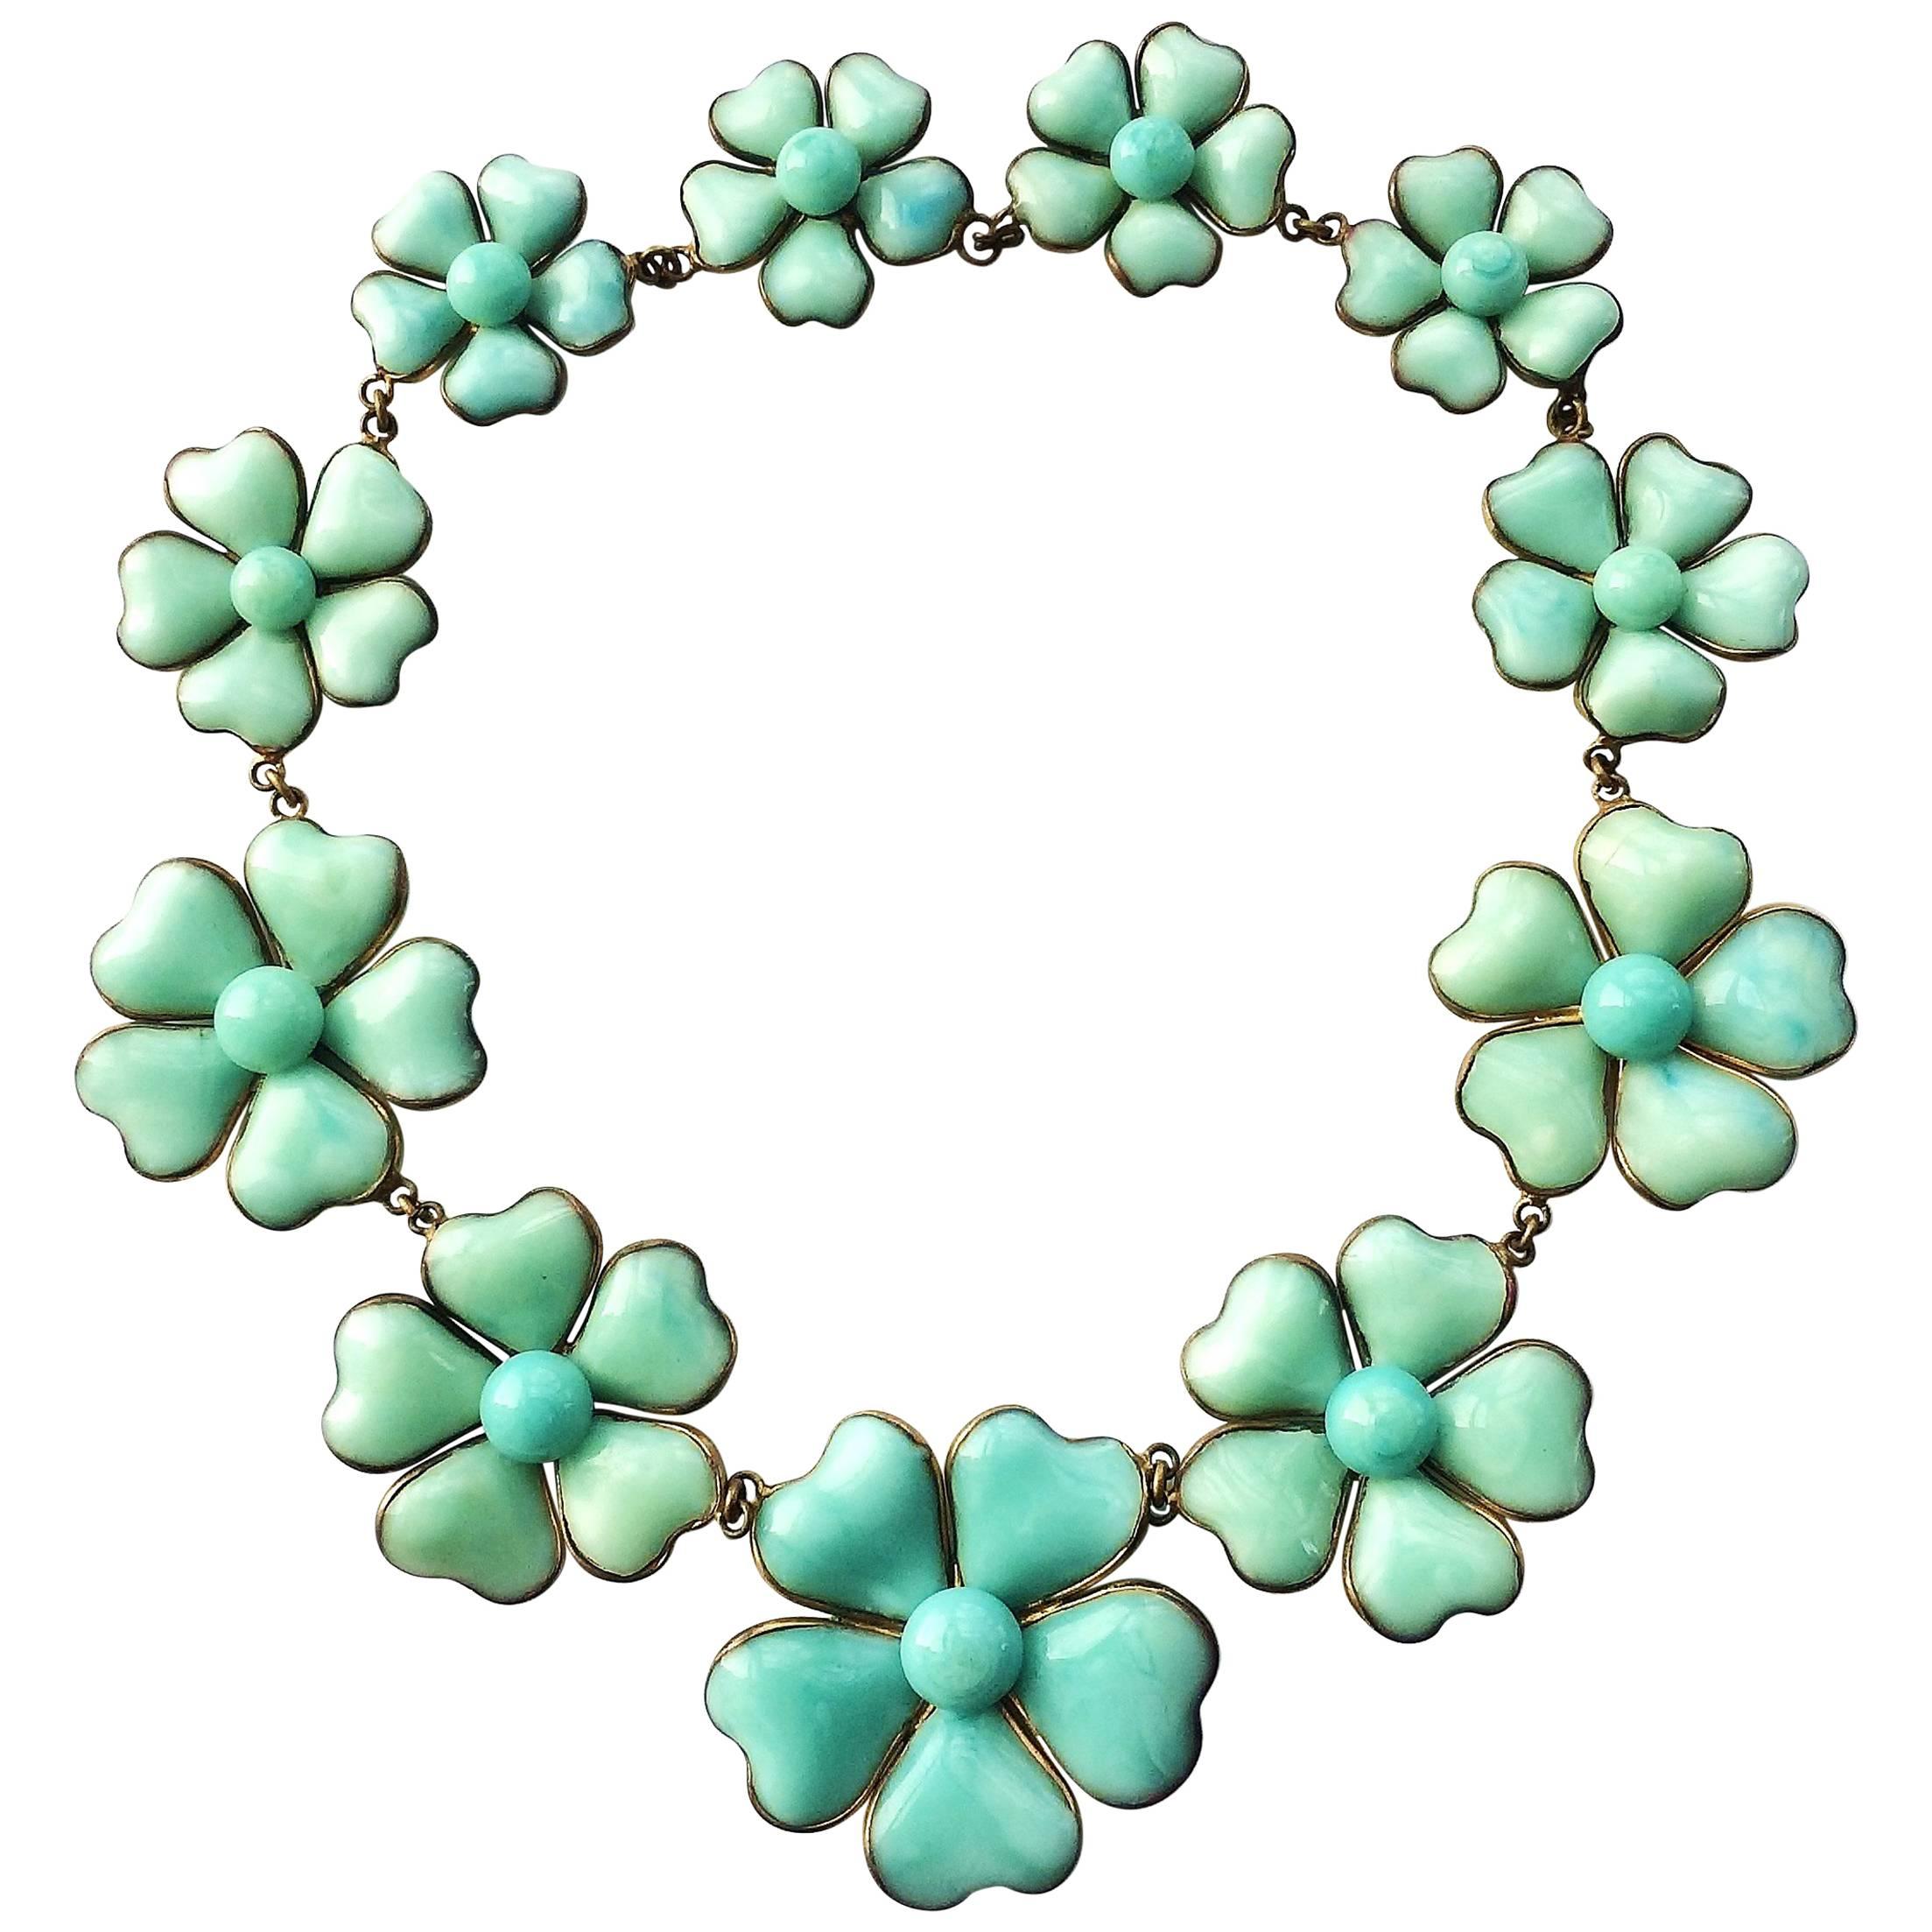 A very rare iconic Chanel poured glass 'camellia' necklace, 1930s